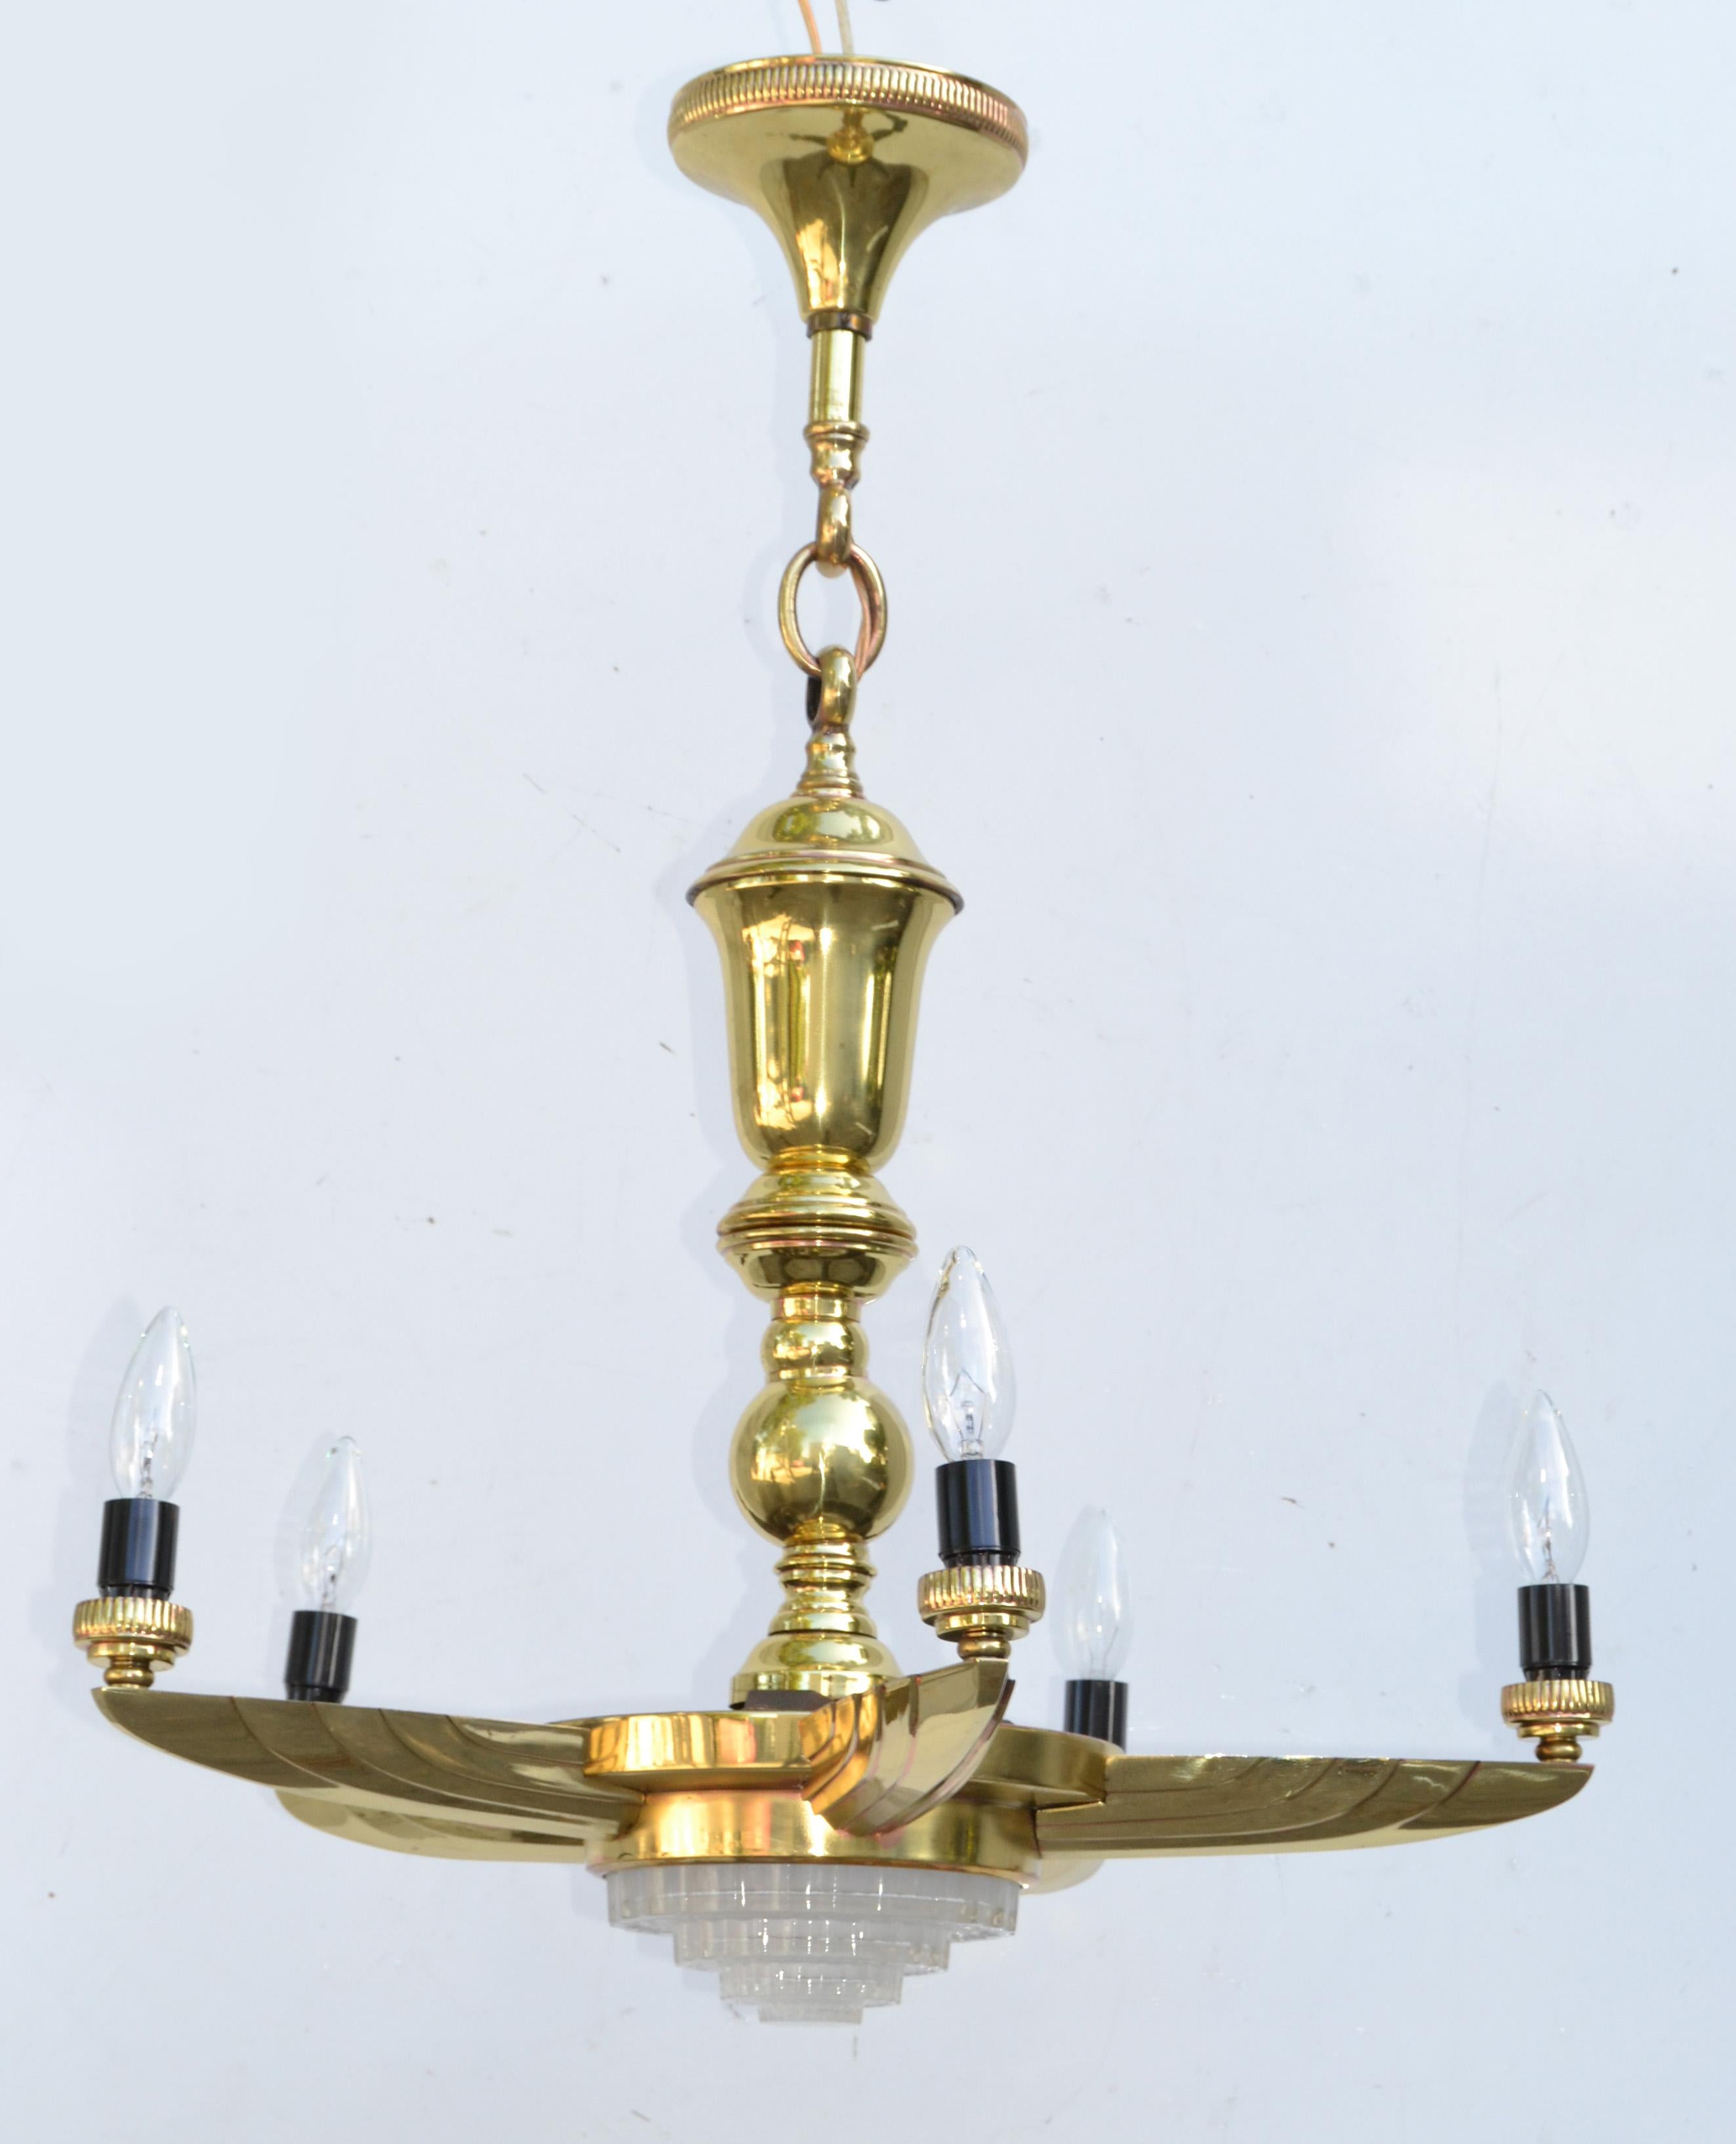 Atelier Petitot French Bronze & Brass 6 Light Round Chandelier Neoclassical In Good Condition For Sale In Miami, FL